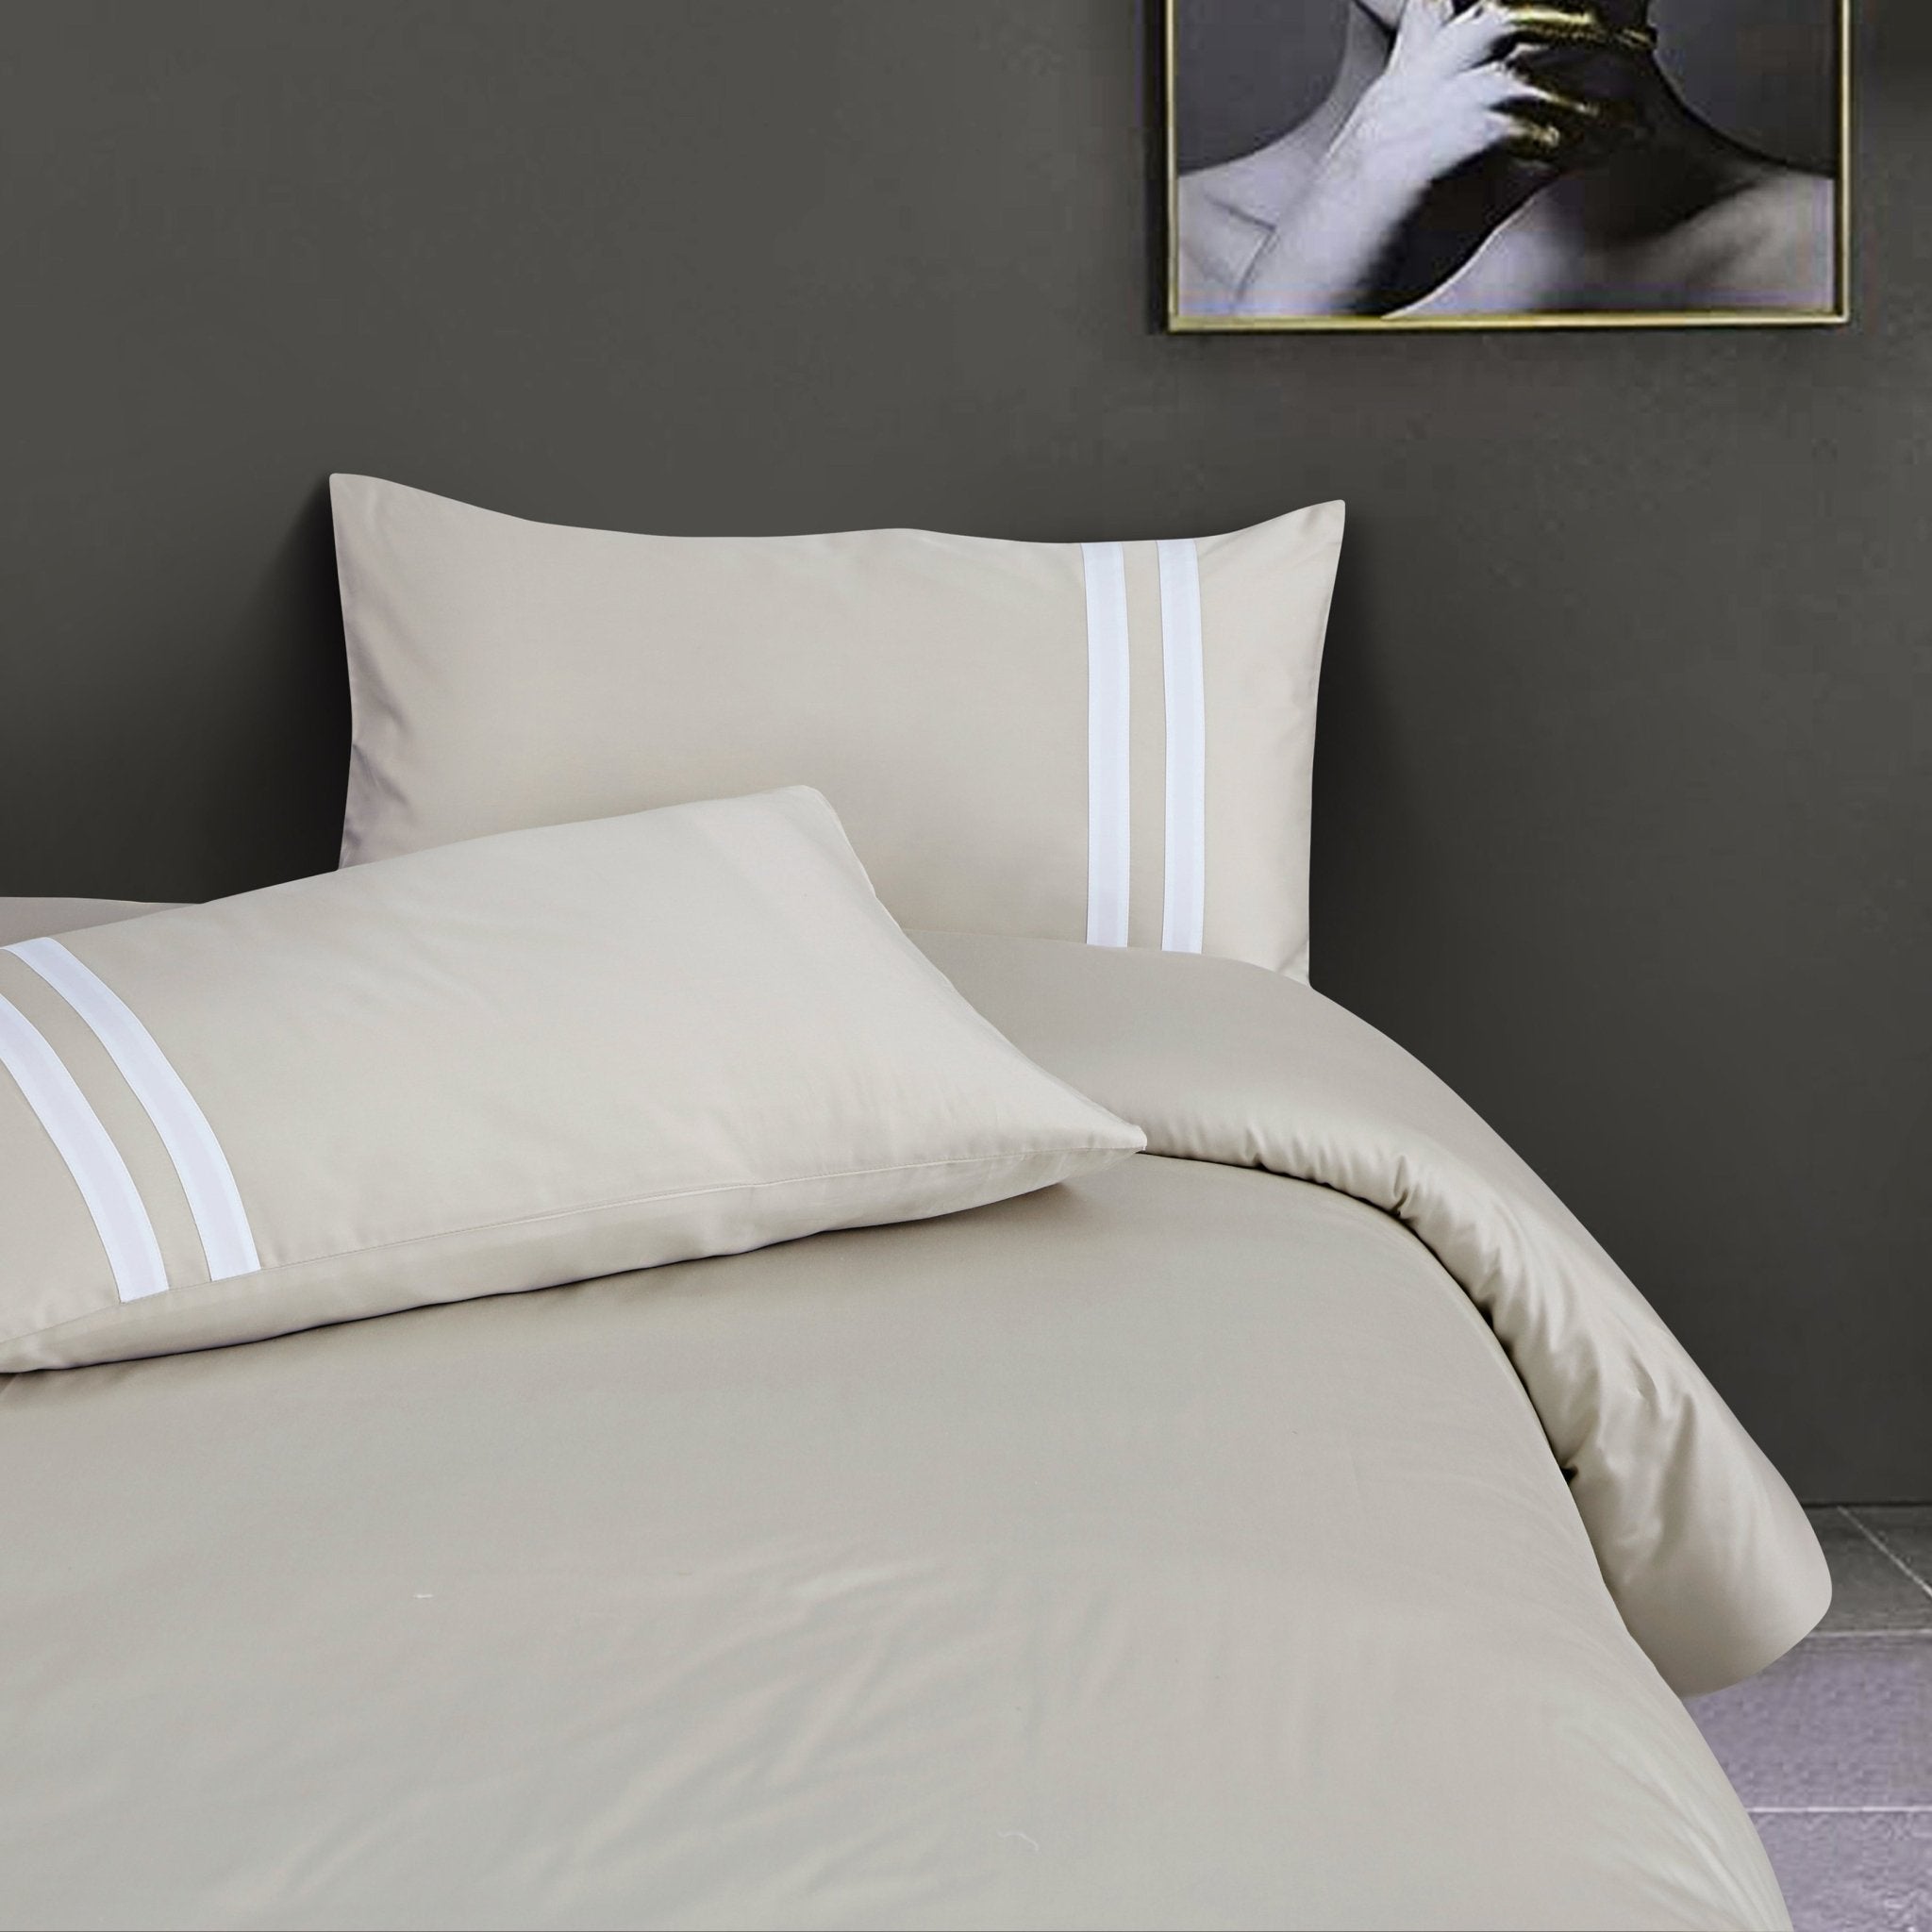 Malako Luxe 550TC 100% Cotton Olive Beige King Size Plain Bedsheet with 2 Striped Pillow Cases - MALAKO